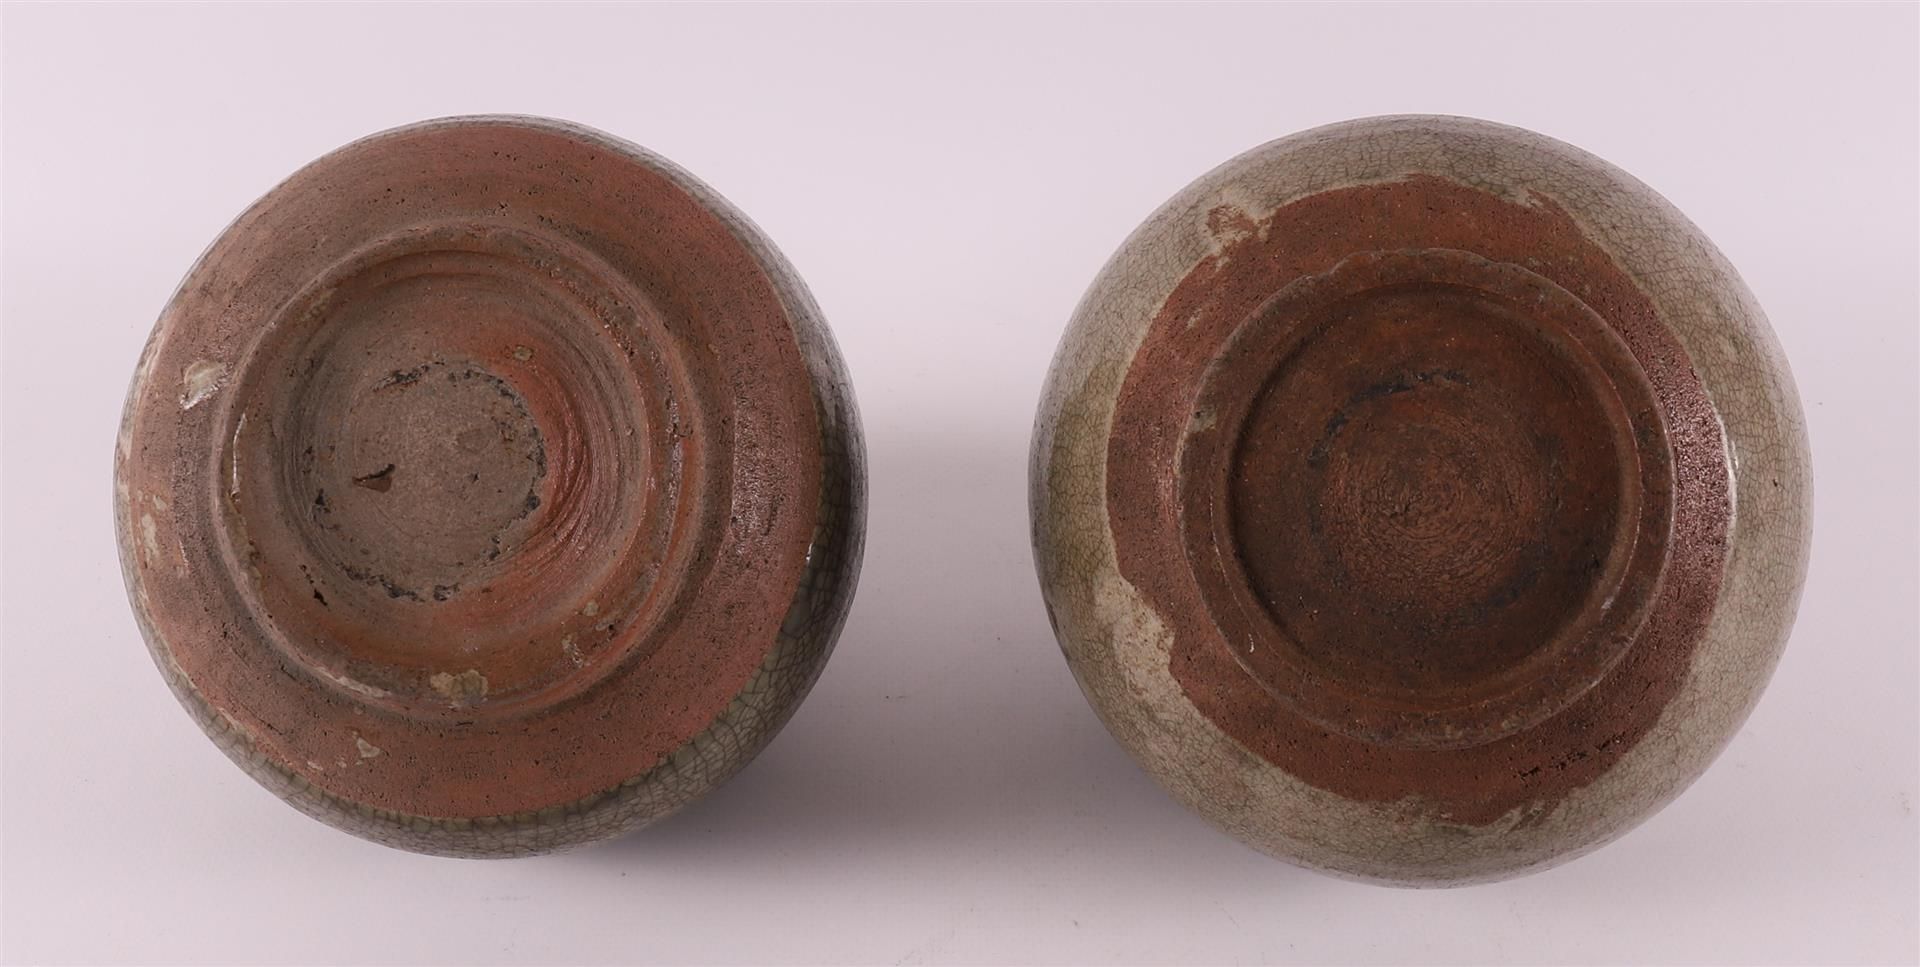 A pair of celadon glazed spherical vases with handles, China, Song Dynasty. - Image 4 of 4